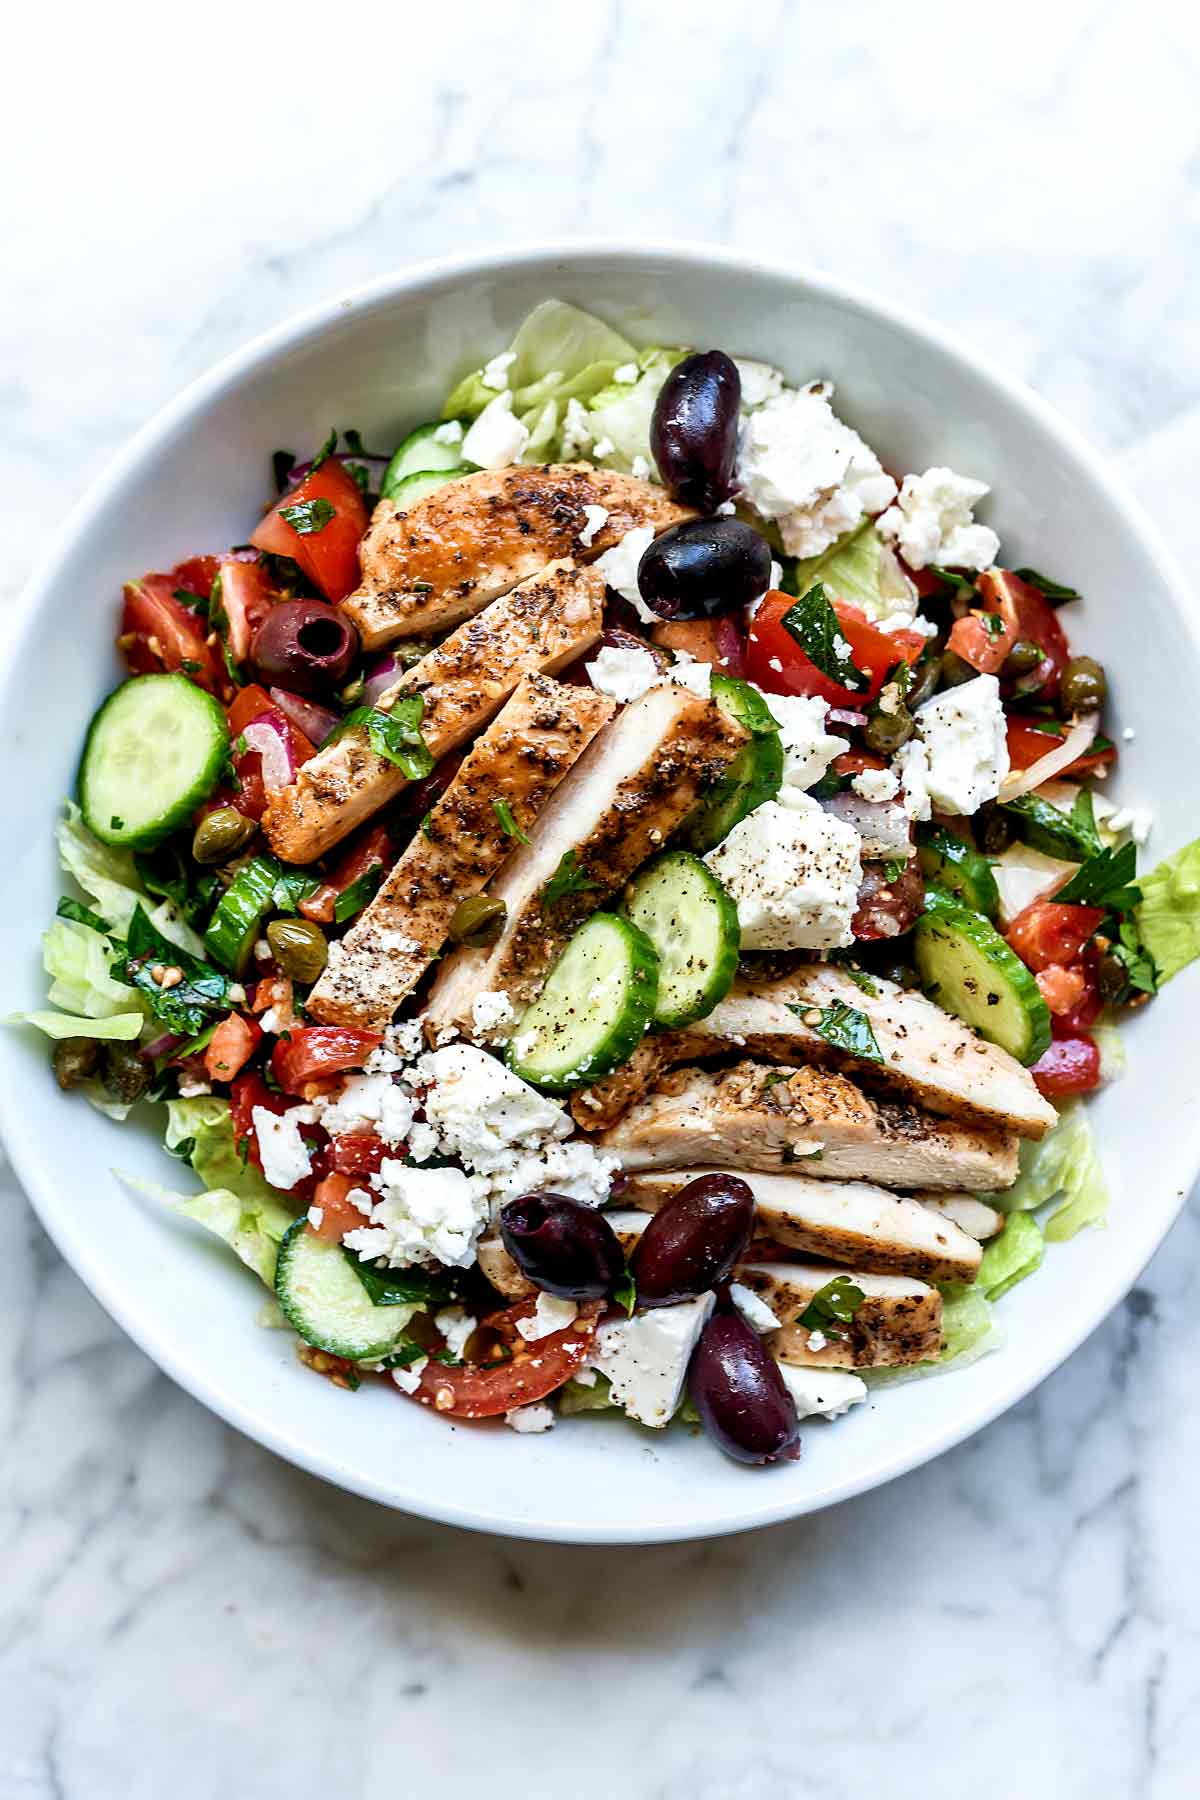 Greek Salad with Chicken from foodiecrush.com on foodiecrush.com